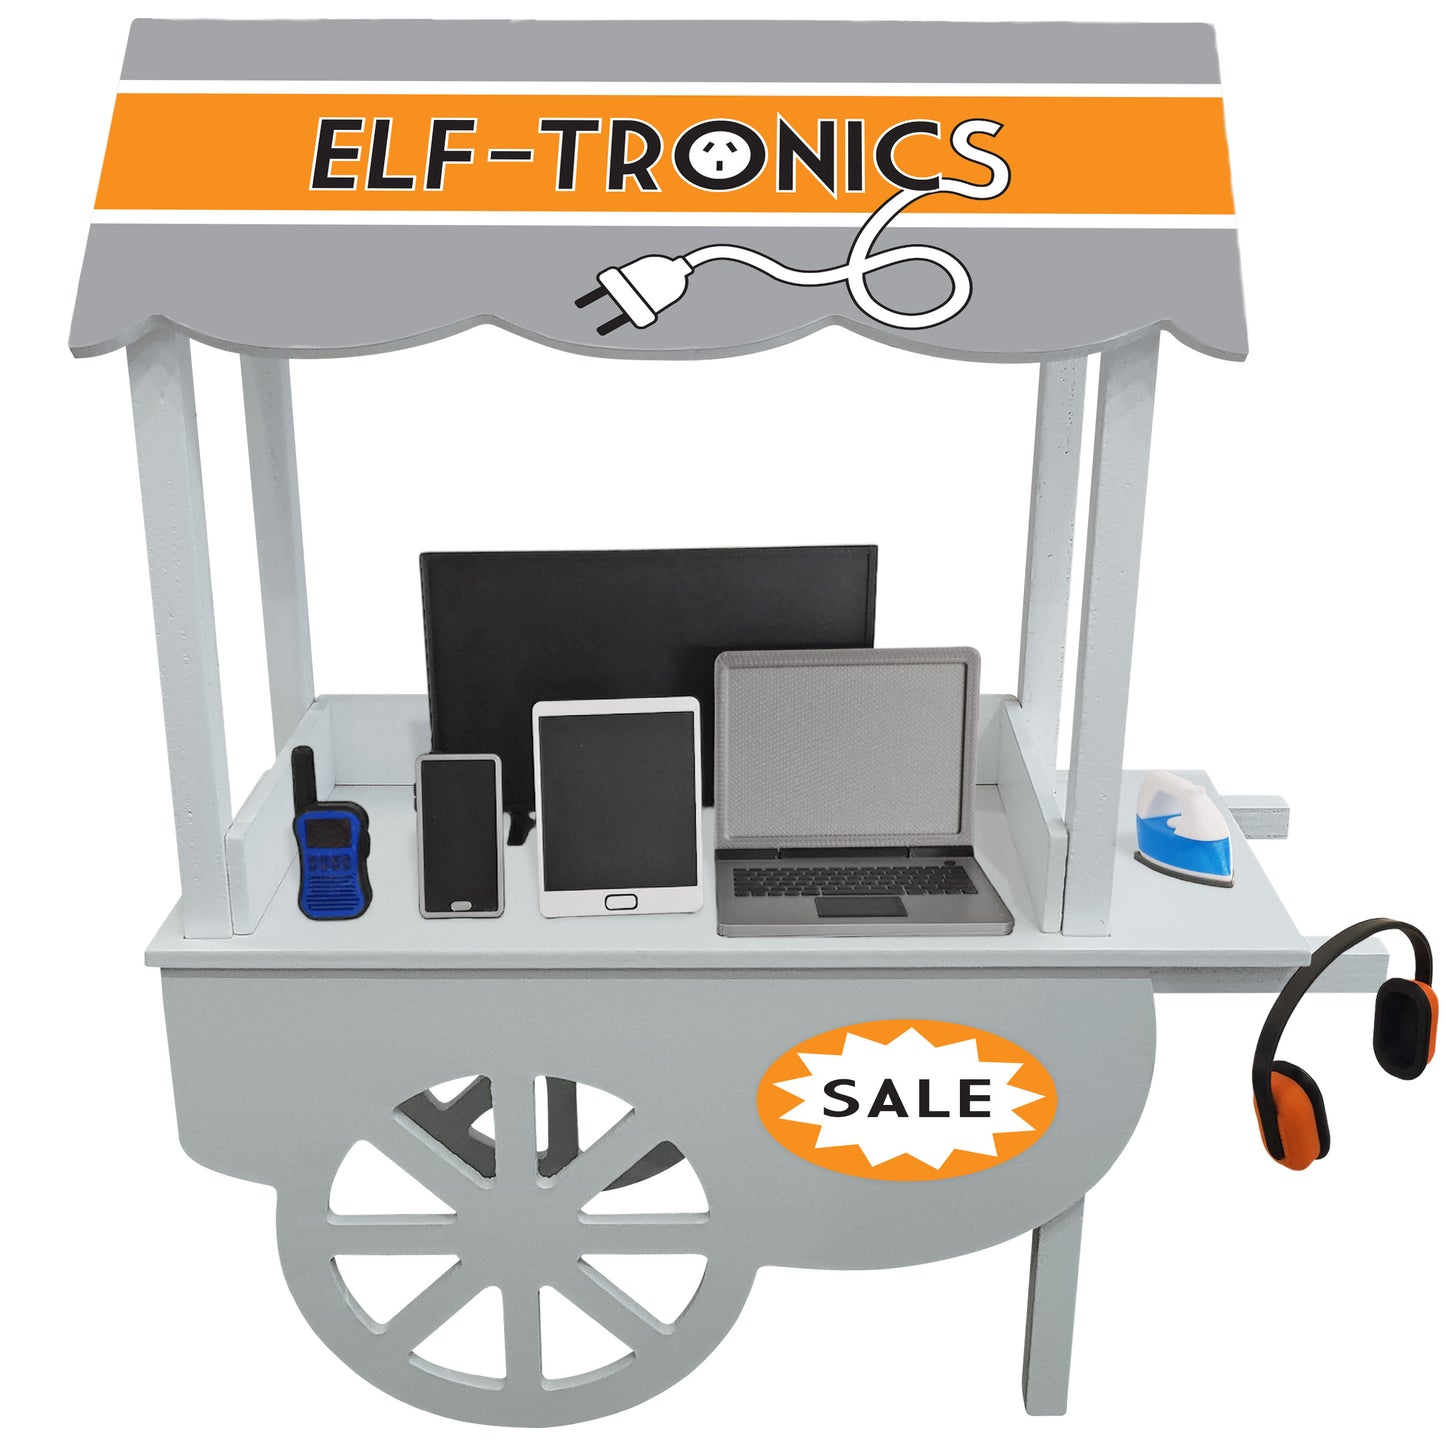 Elf printable electronic store, with miniature laptops, tv, tablets, phones and other electrical goods